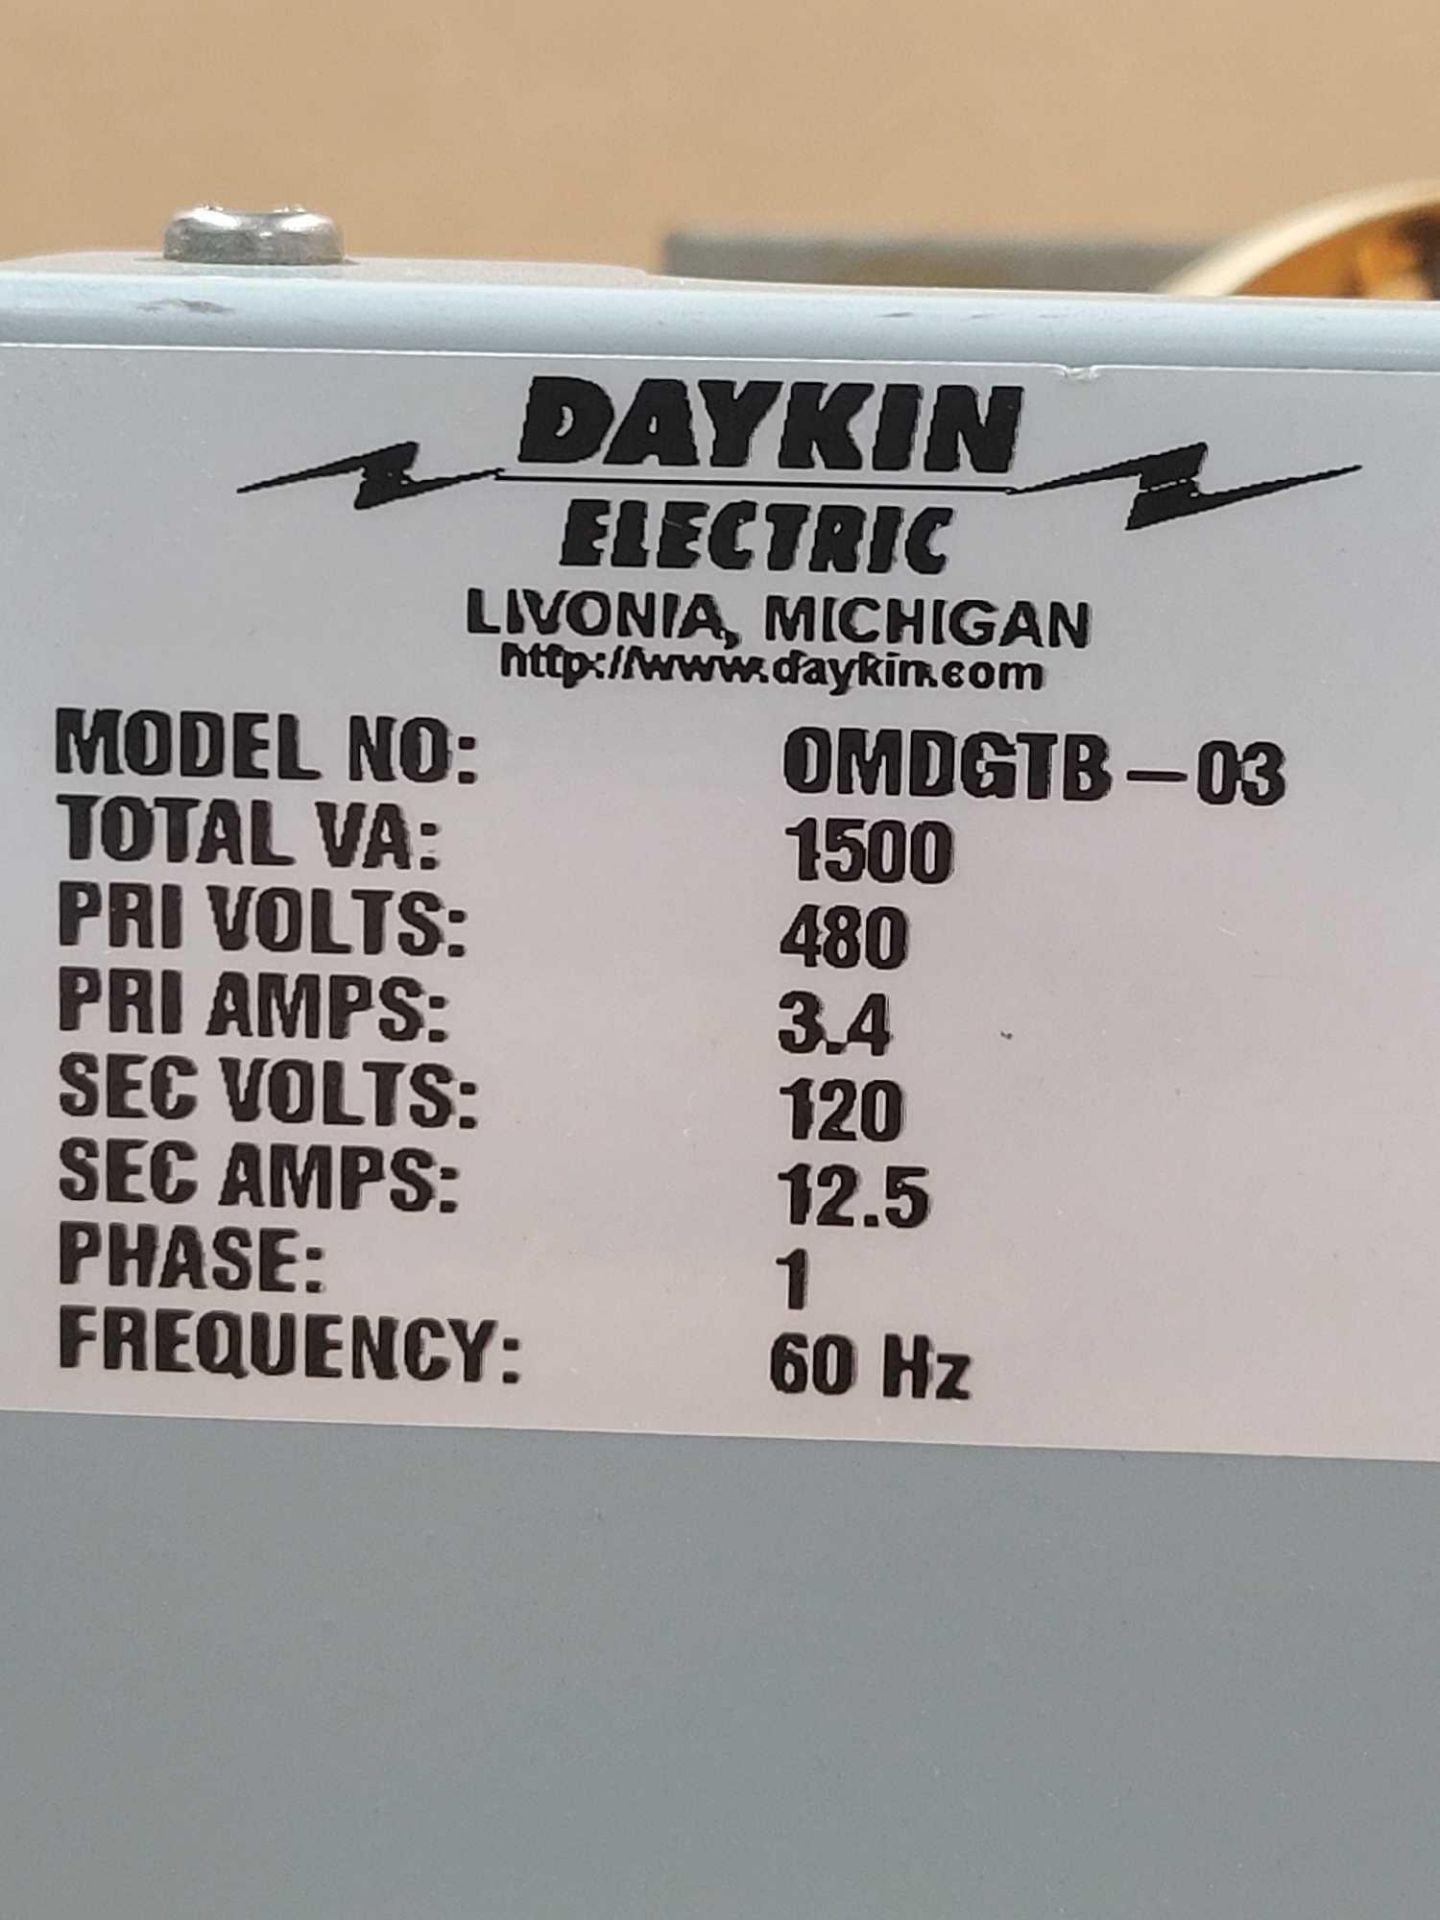 DAYKIN ELECTRIC 0MDGTB-03 with DAYKIN ELECTRIC TL4100 / Transformer Disconnect Switch with Transform - Image 6 of 9